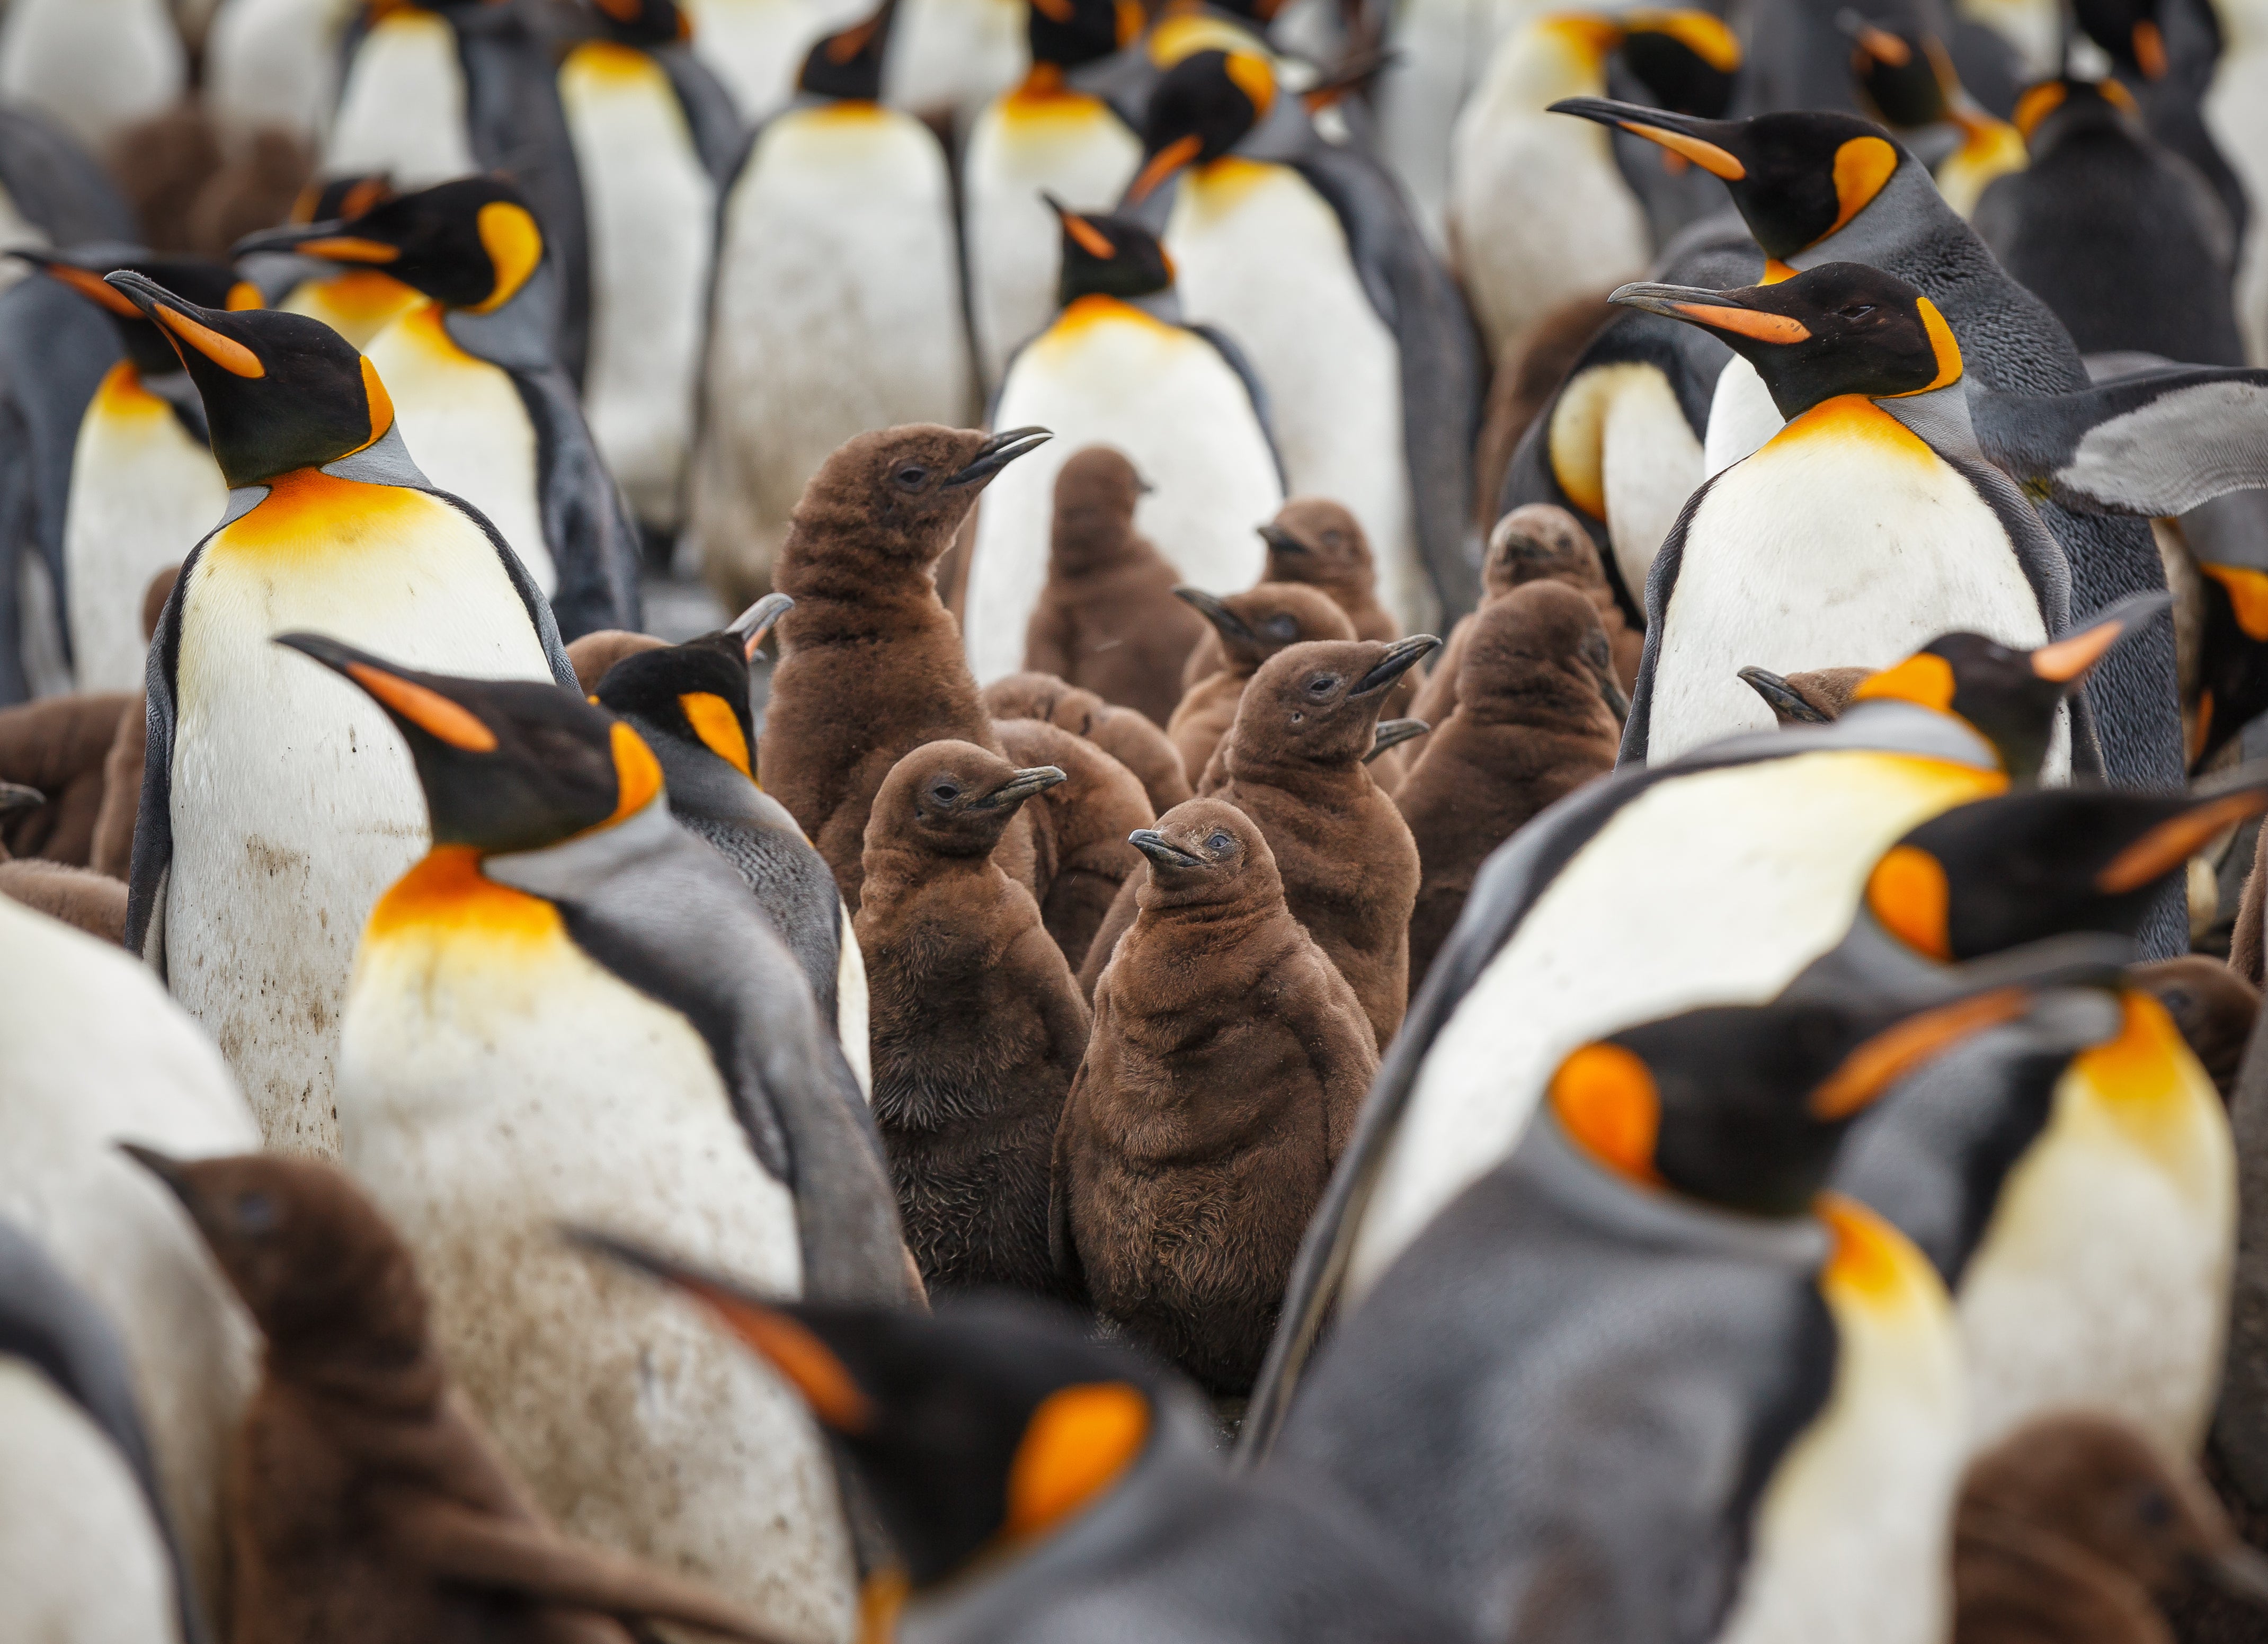 Antarctica's Penguins Could Be Devastated by Avian Influenza